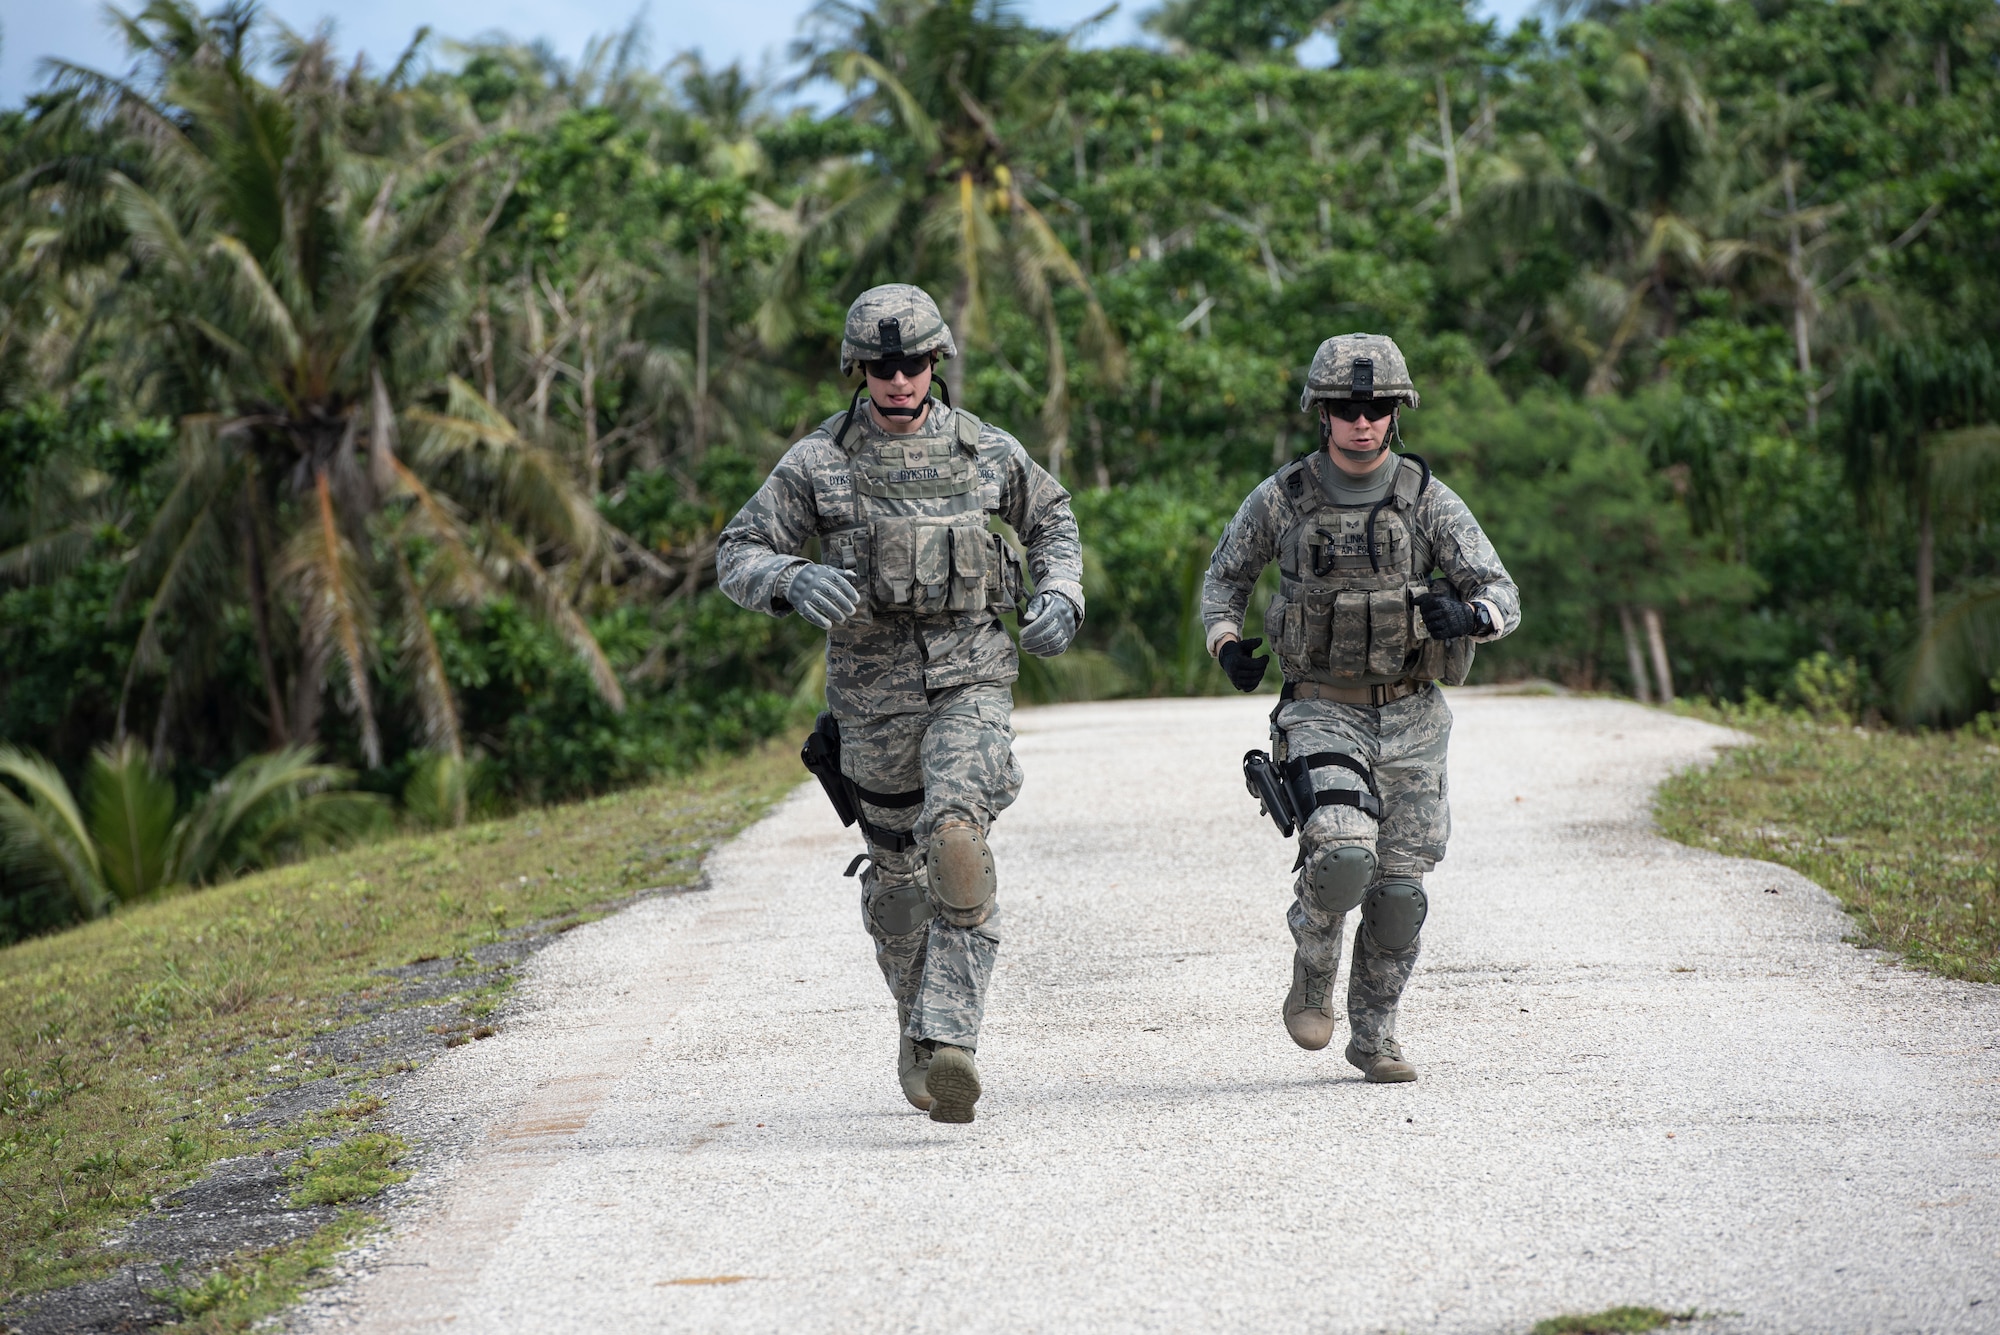 Two students run during the Shoot, Move and Communicate portion of Commando Warrior training at North West Field near Andersen Air Force Base, Guam Dec. 10, 2018. The 736th Security Forces Squadron trains frontline defenders from all bases assigned to Pacific Air Forces on U. S. Central Command and regional training requirements so they can deploy as well as utilize trained skills at their home stations. (U.S. Air Force photo by Master Sgt. JT May III)